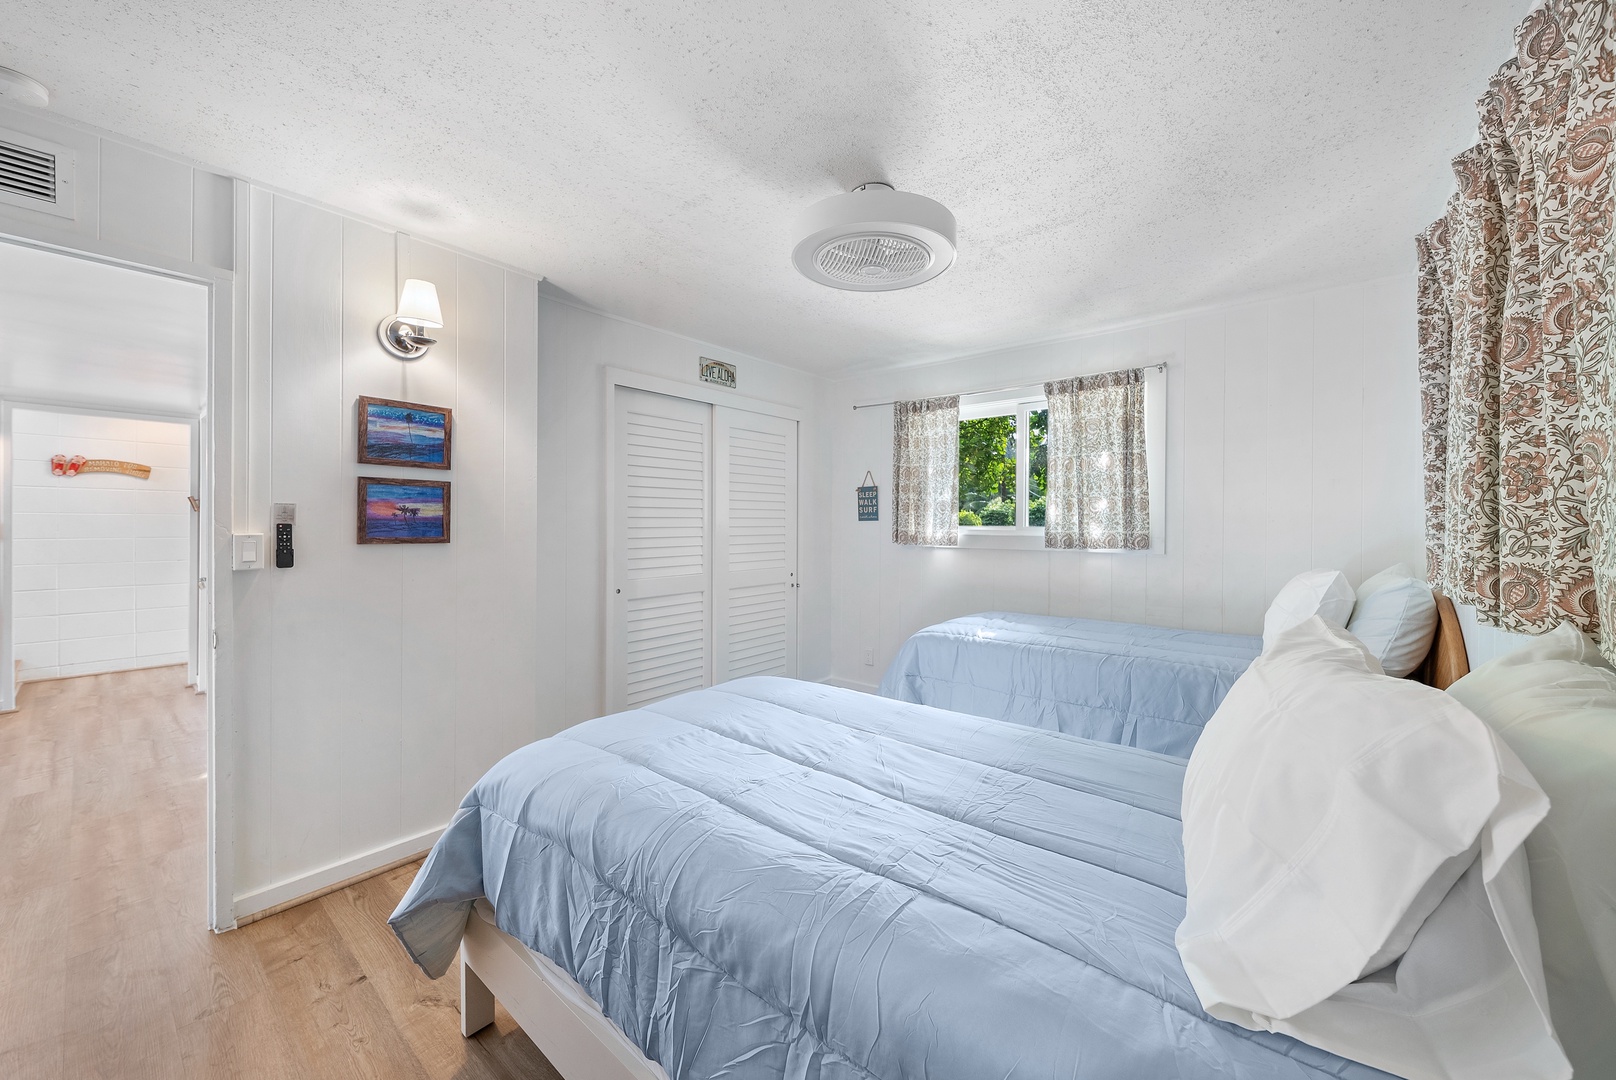 Haleiwa Vacation Rentals, Surfer's Paradise - The perfect space for the kiddos to get some rest after a day of island fun